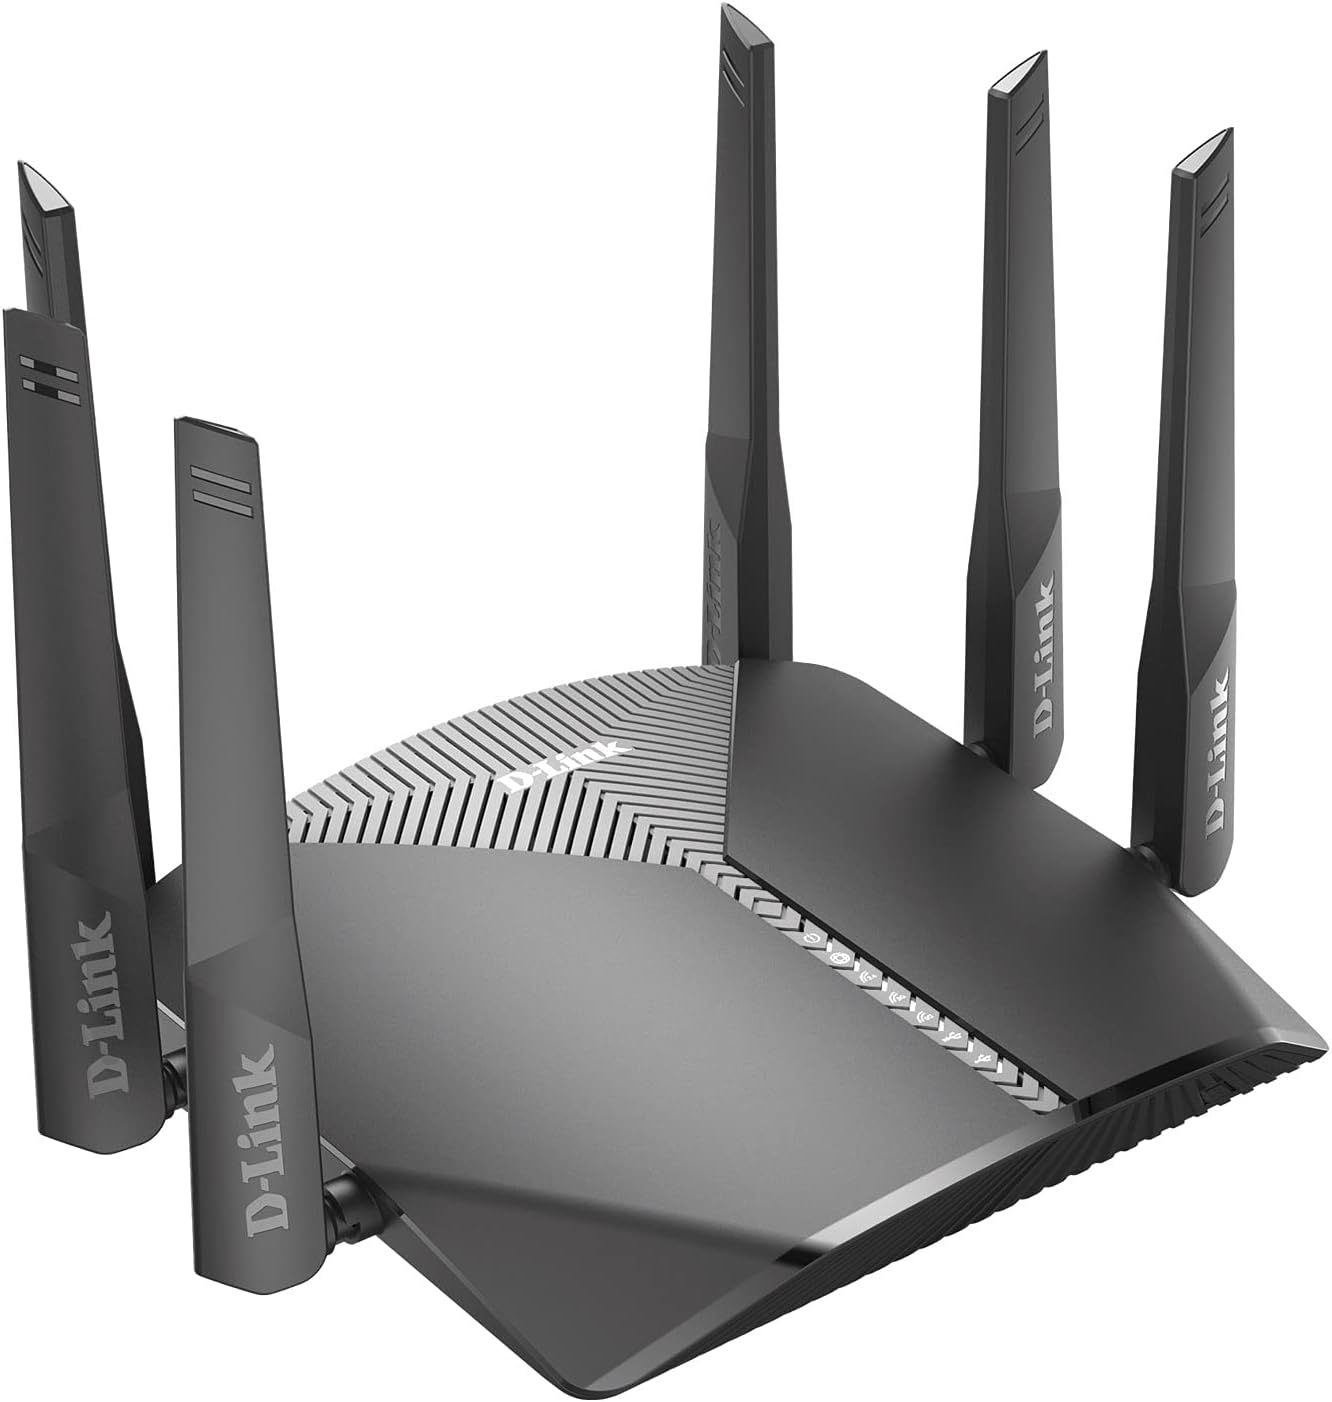 Primary image for Ac3000, Smart, Mesh Wifi Router From D-Link (Dir-3040).